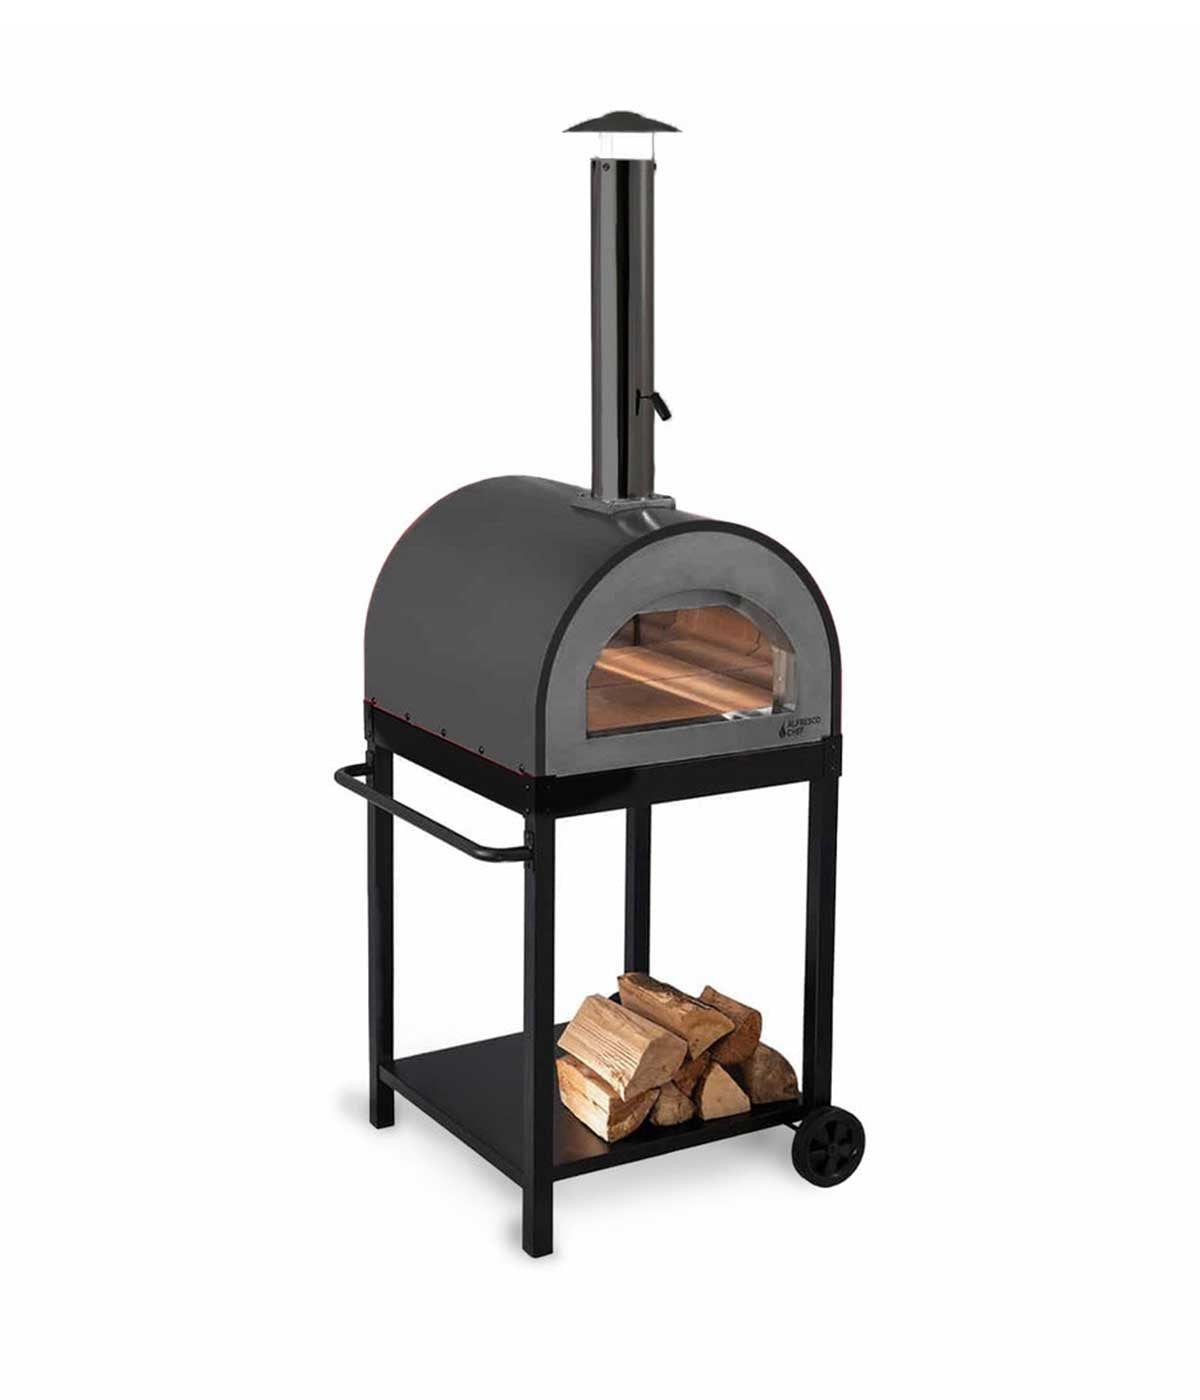 Alfresco Chef - Naples Wood Fired Outdoor Pizza Oven in Black🍕